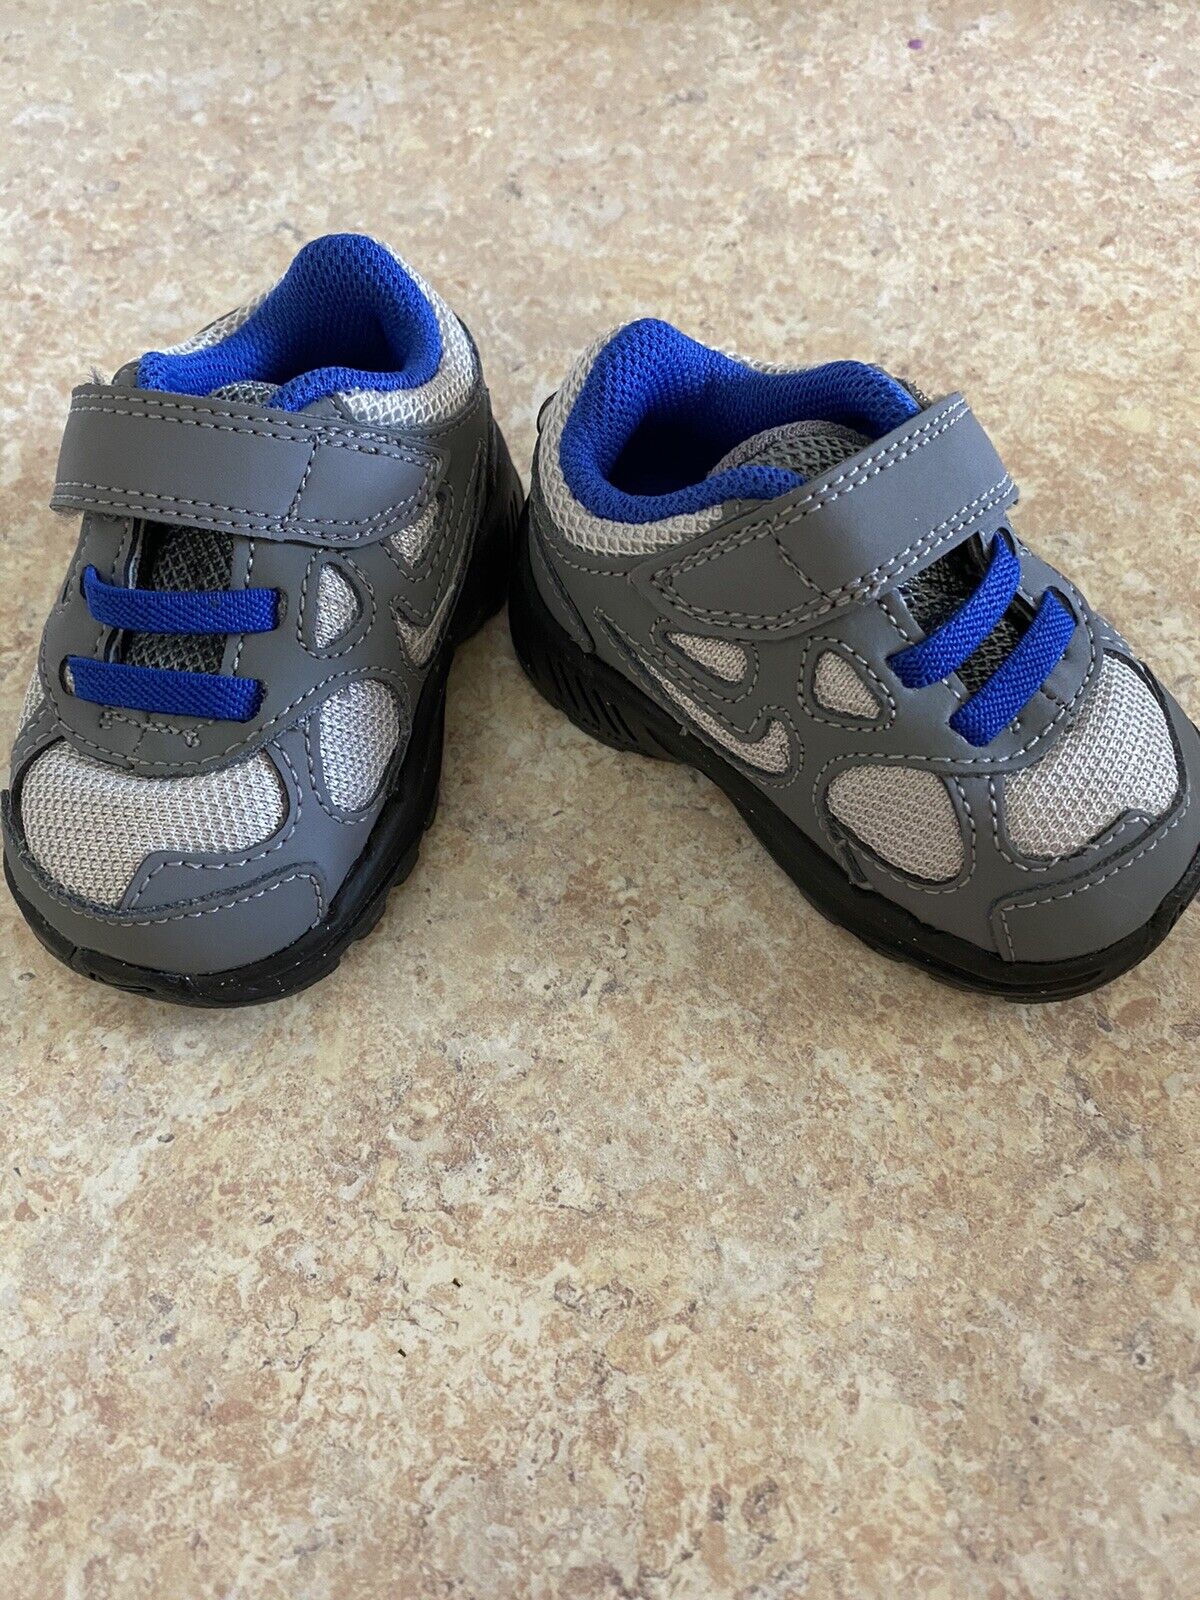 Nike Little Bombing free shipping New York Mall Boys Tennis Shoes Size 2.5c